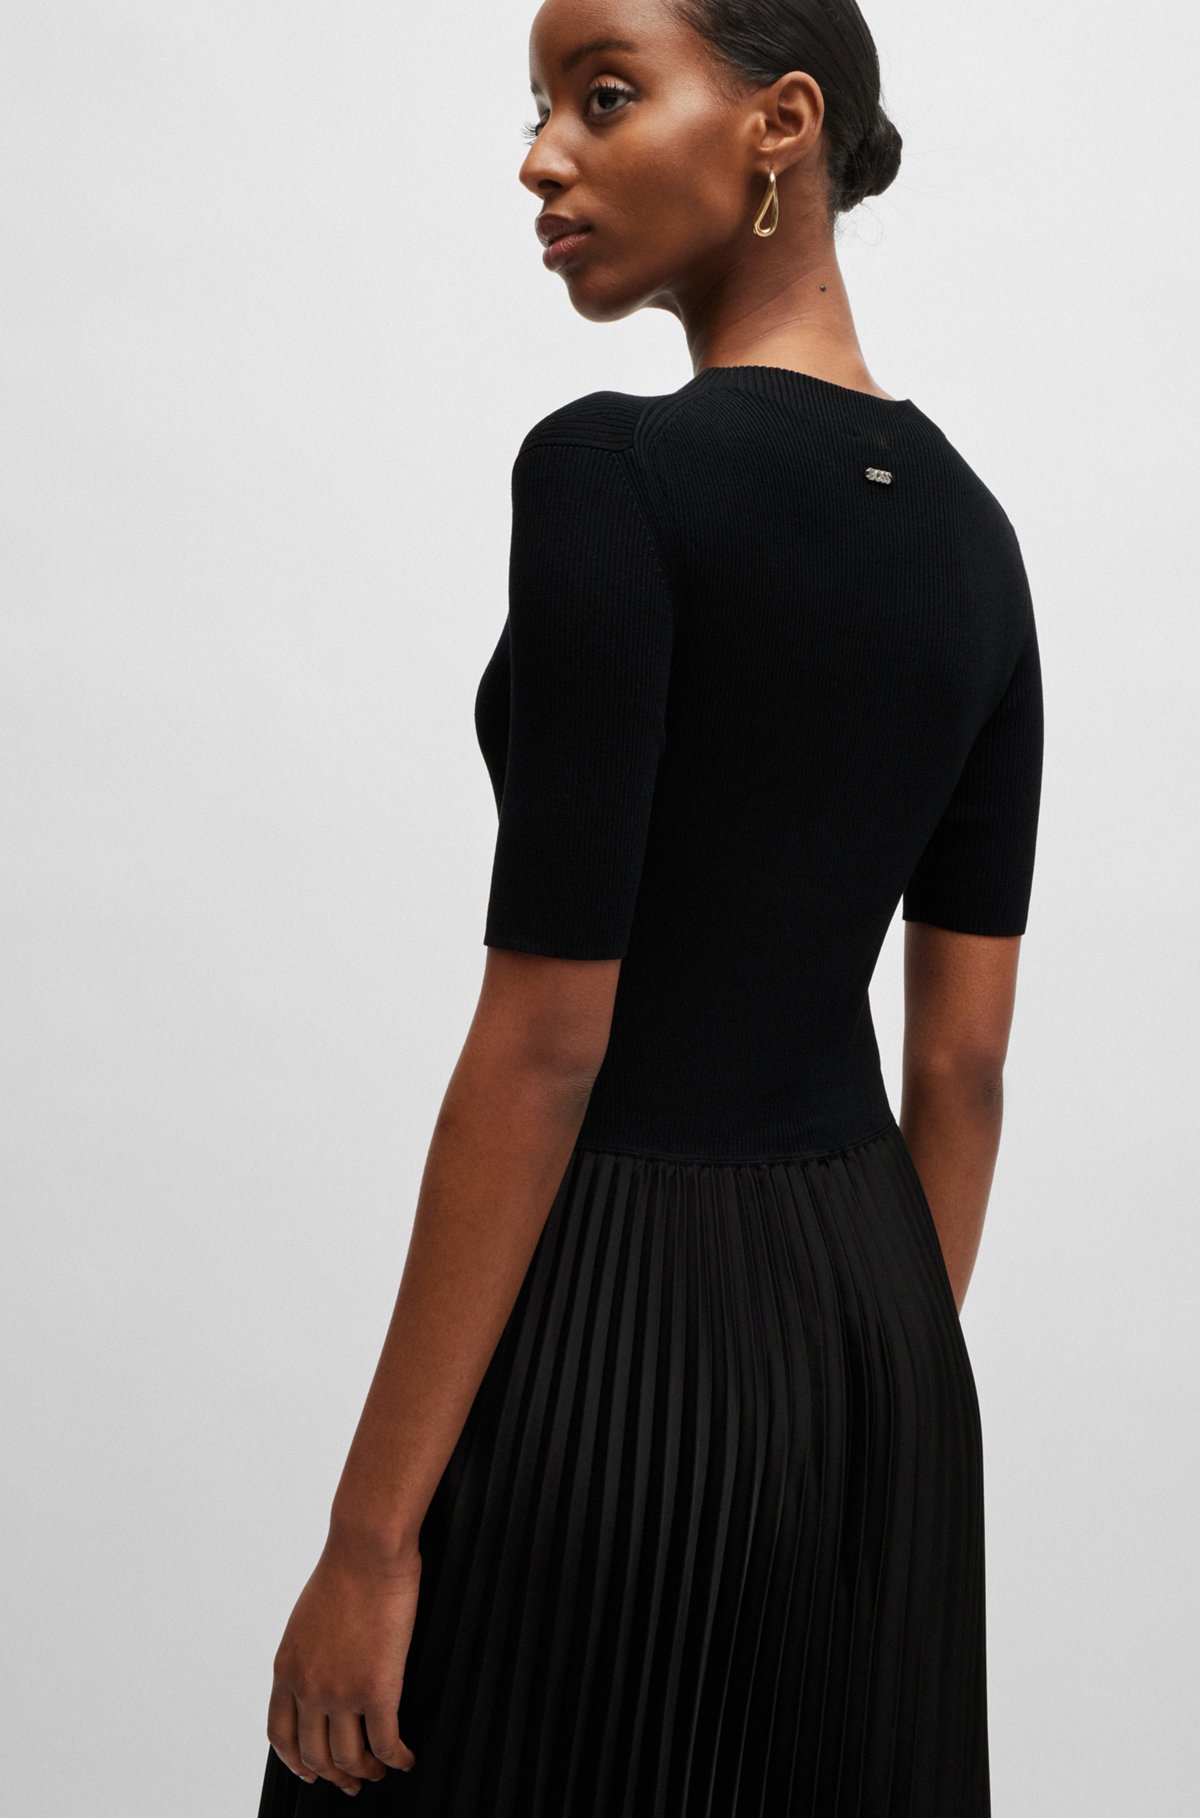 Short-sleeved dress with knitted top and plissé skirt, Black